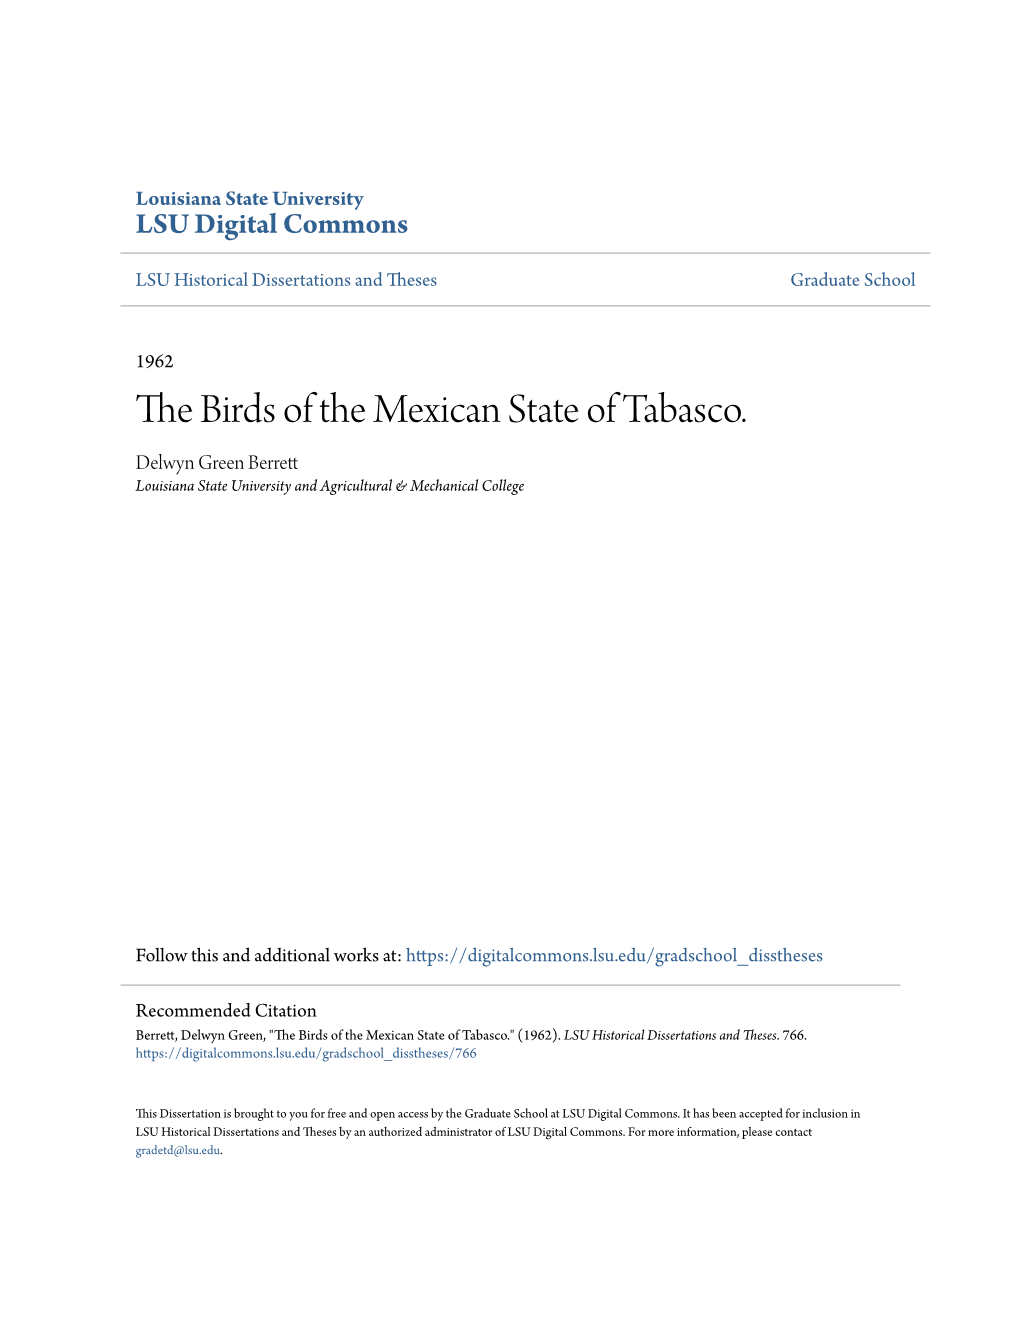 The Birds of the Mexican State of Tabasco